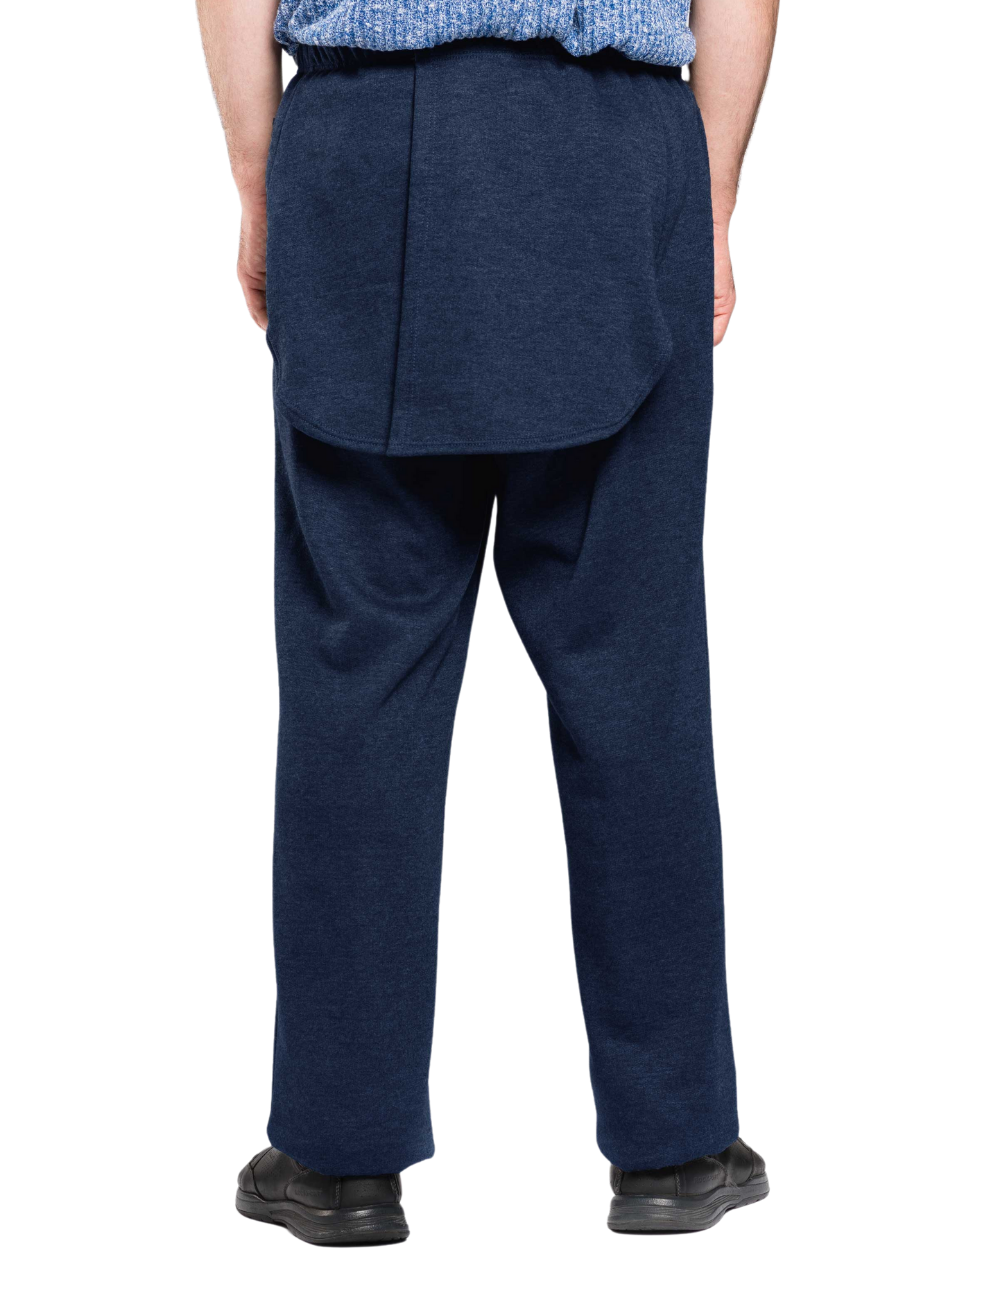 Men's Back-Zip Jumpsuit (2X only) Adaptive Clothing for Seniors, Disabled &  Elderly Care